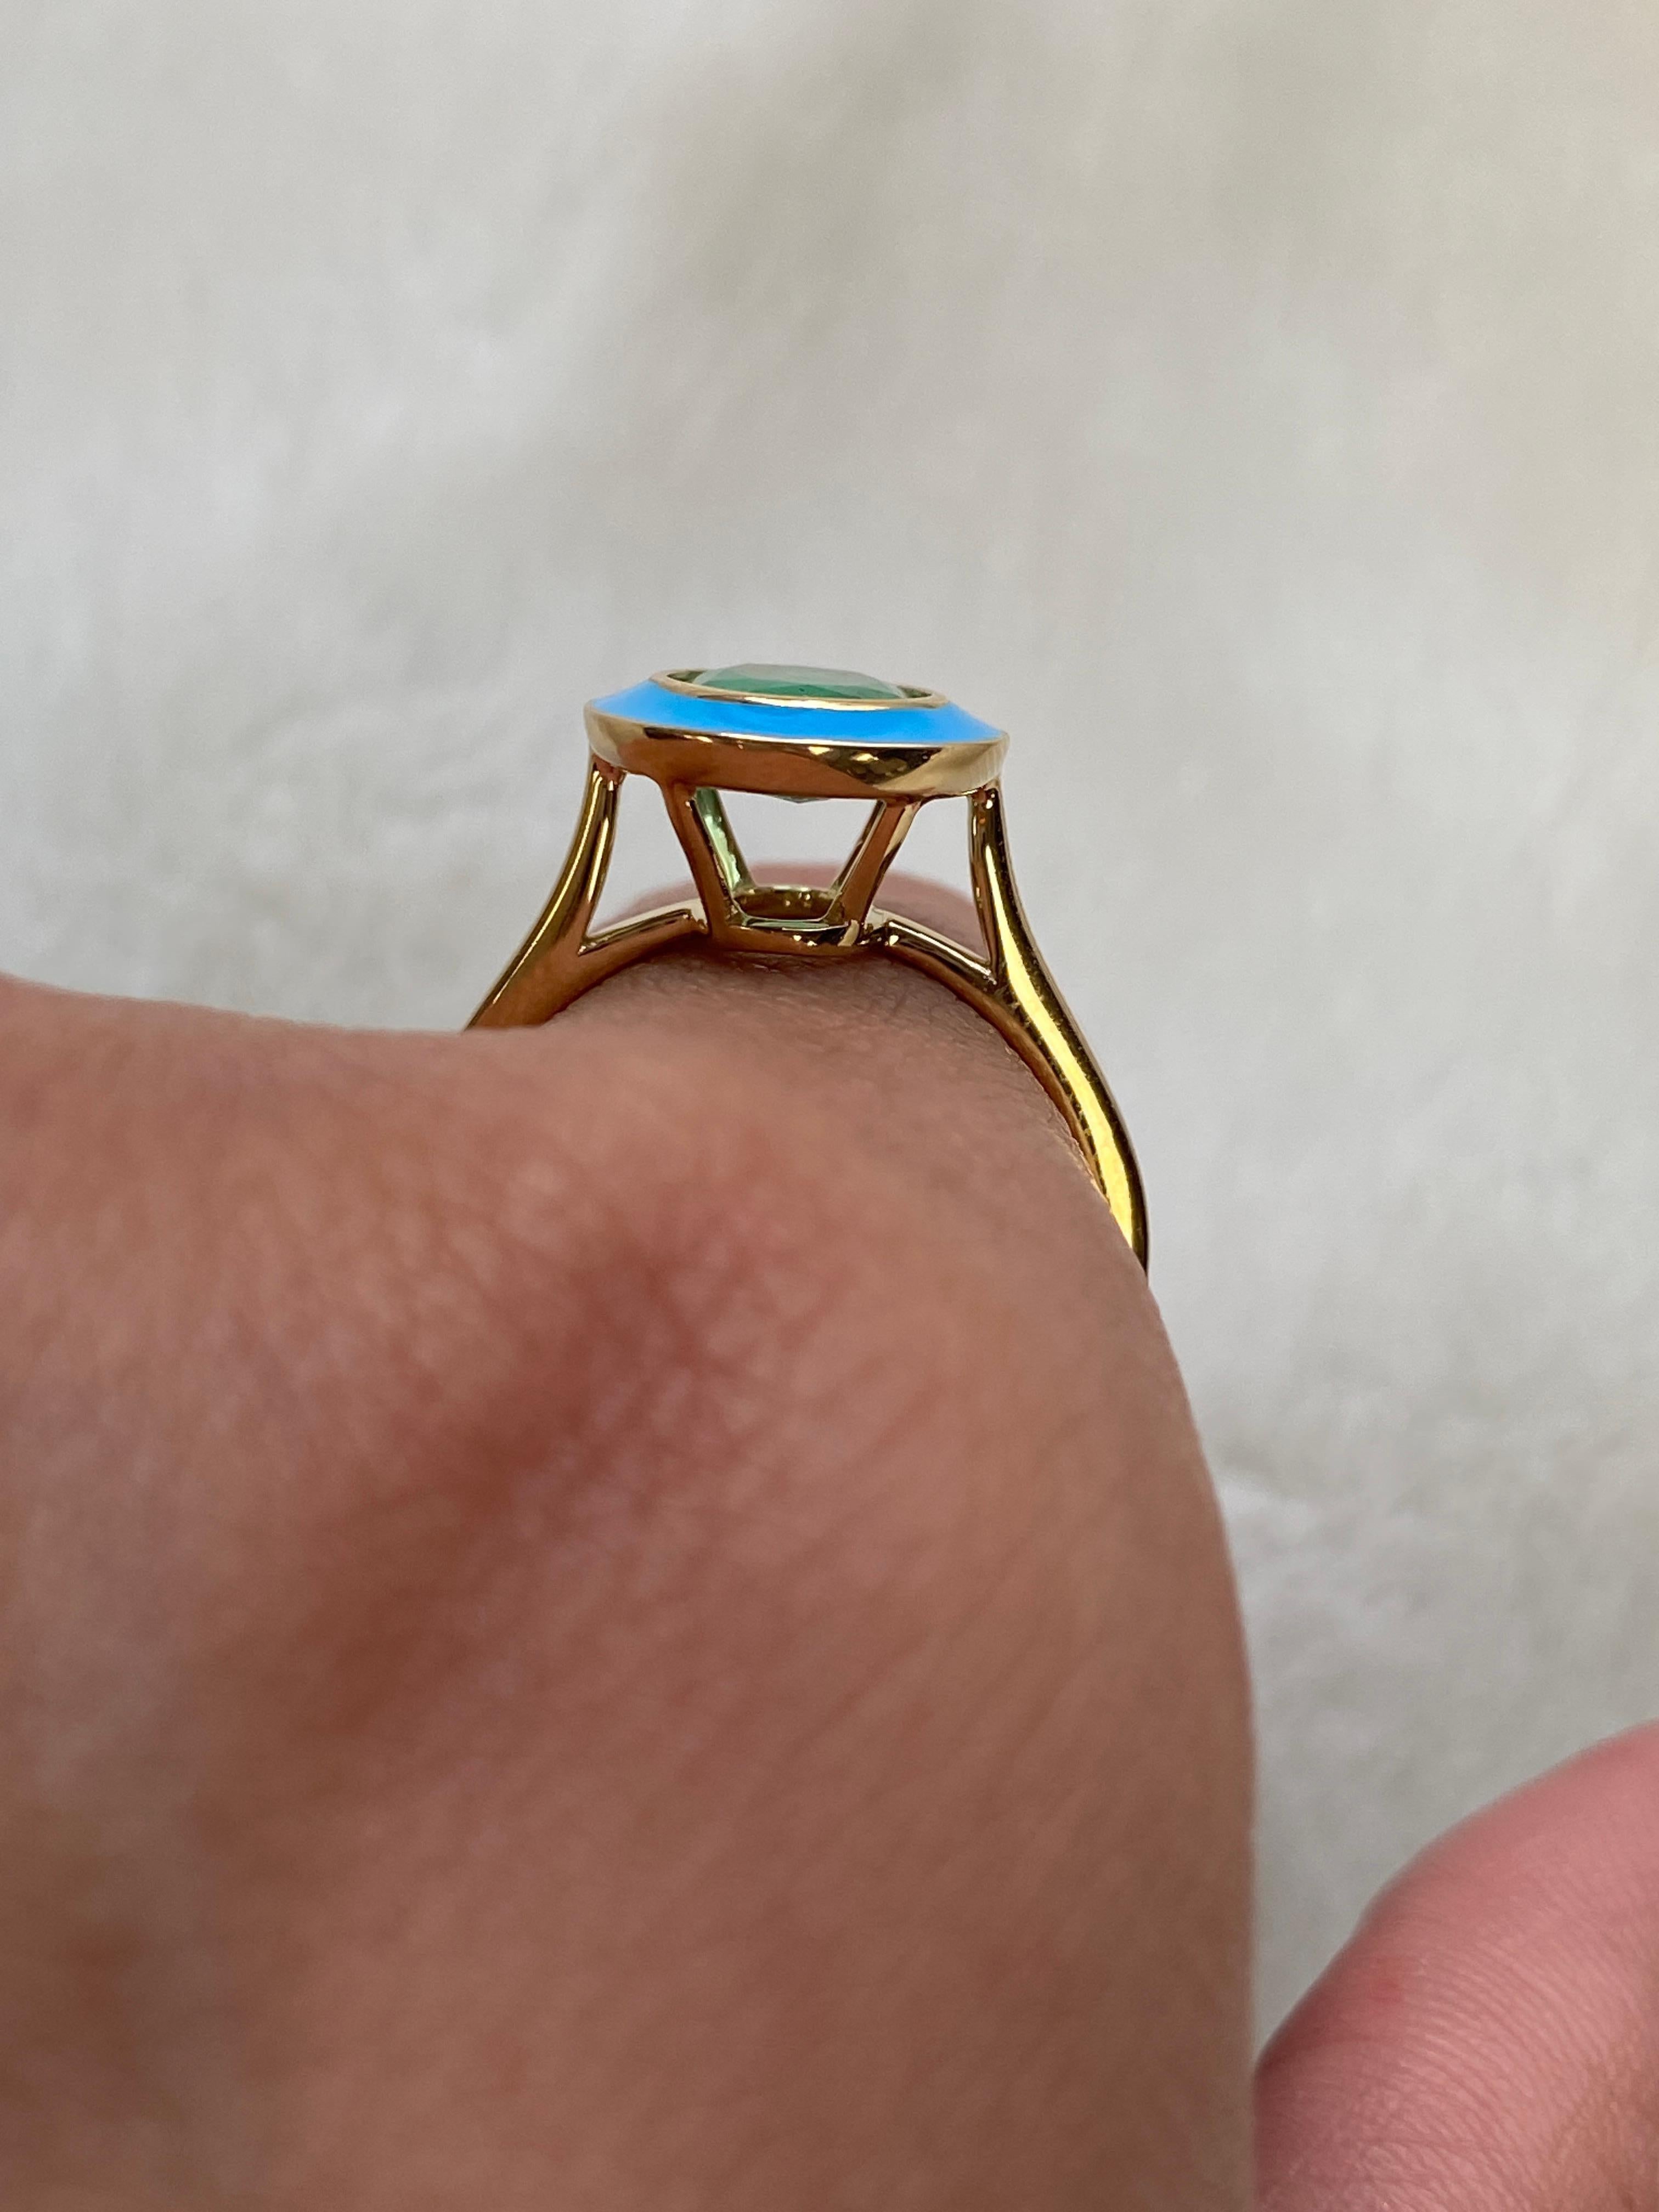 Faceted Oval Emerald Ring with Turquoise Enamel in 18K Yellow Gold, from 'Queen' Collection. The combination of enamel, and Emerald represents power, richness and passion of a true Queen. The feeling of luxury is what we’re aiming for, but at a